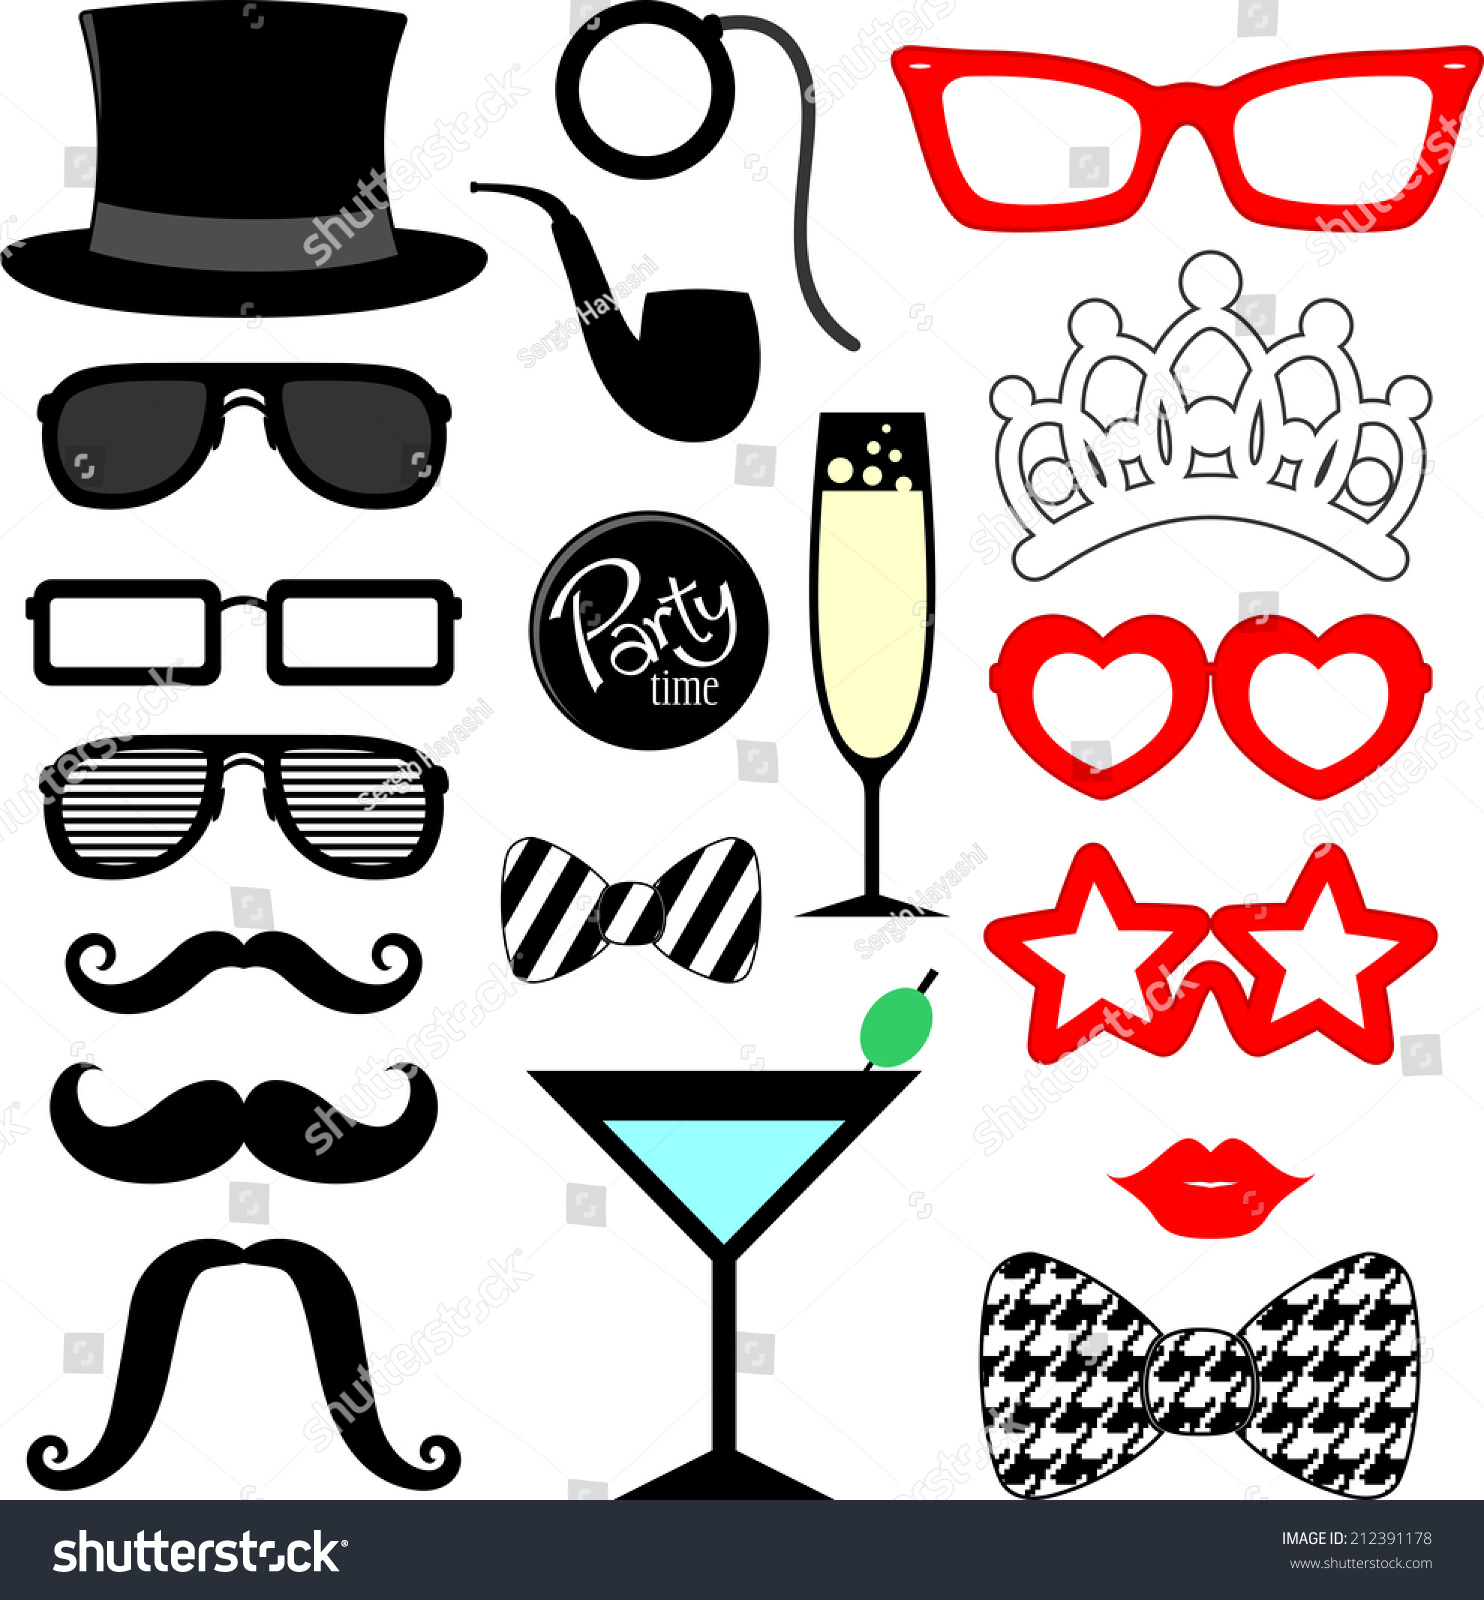 mustaches, lips, eyeglasses silhouettes and design elements for party props isolated on white background #212391178